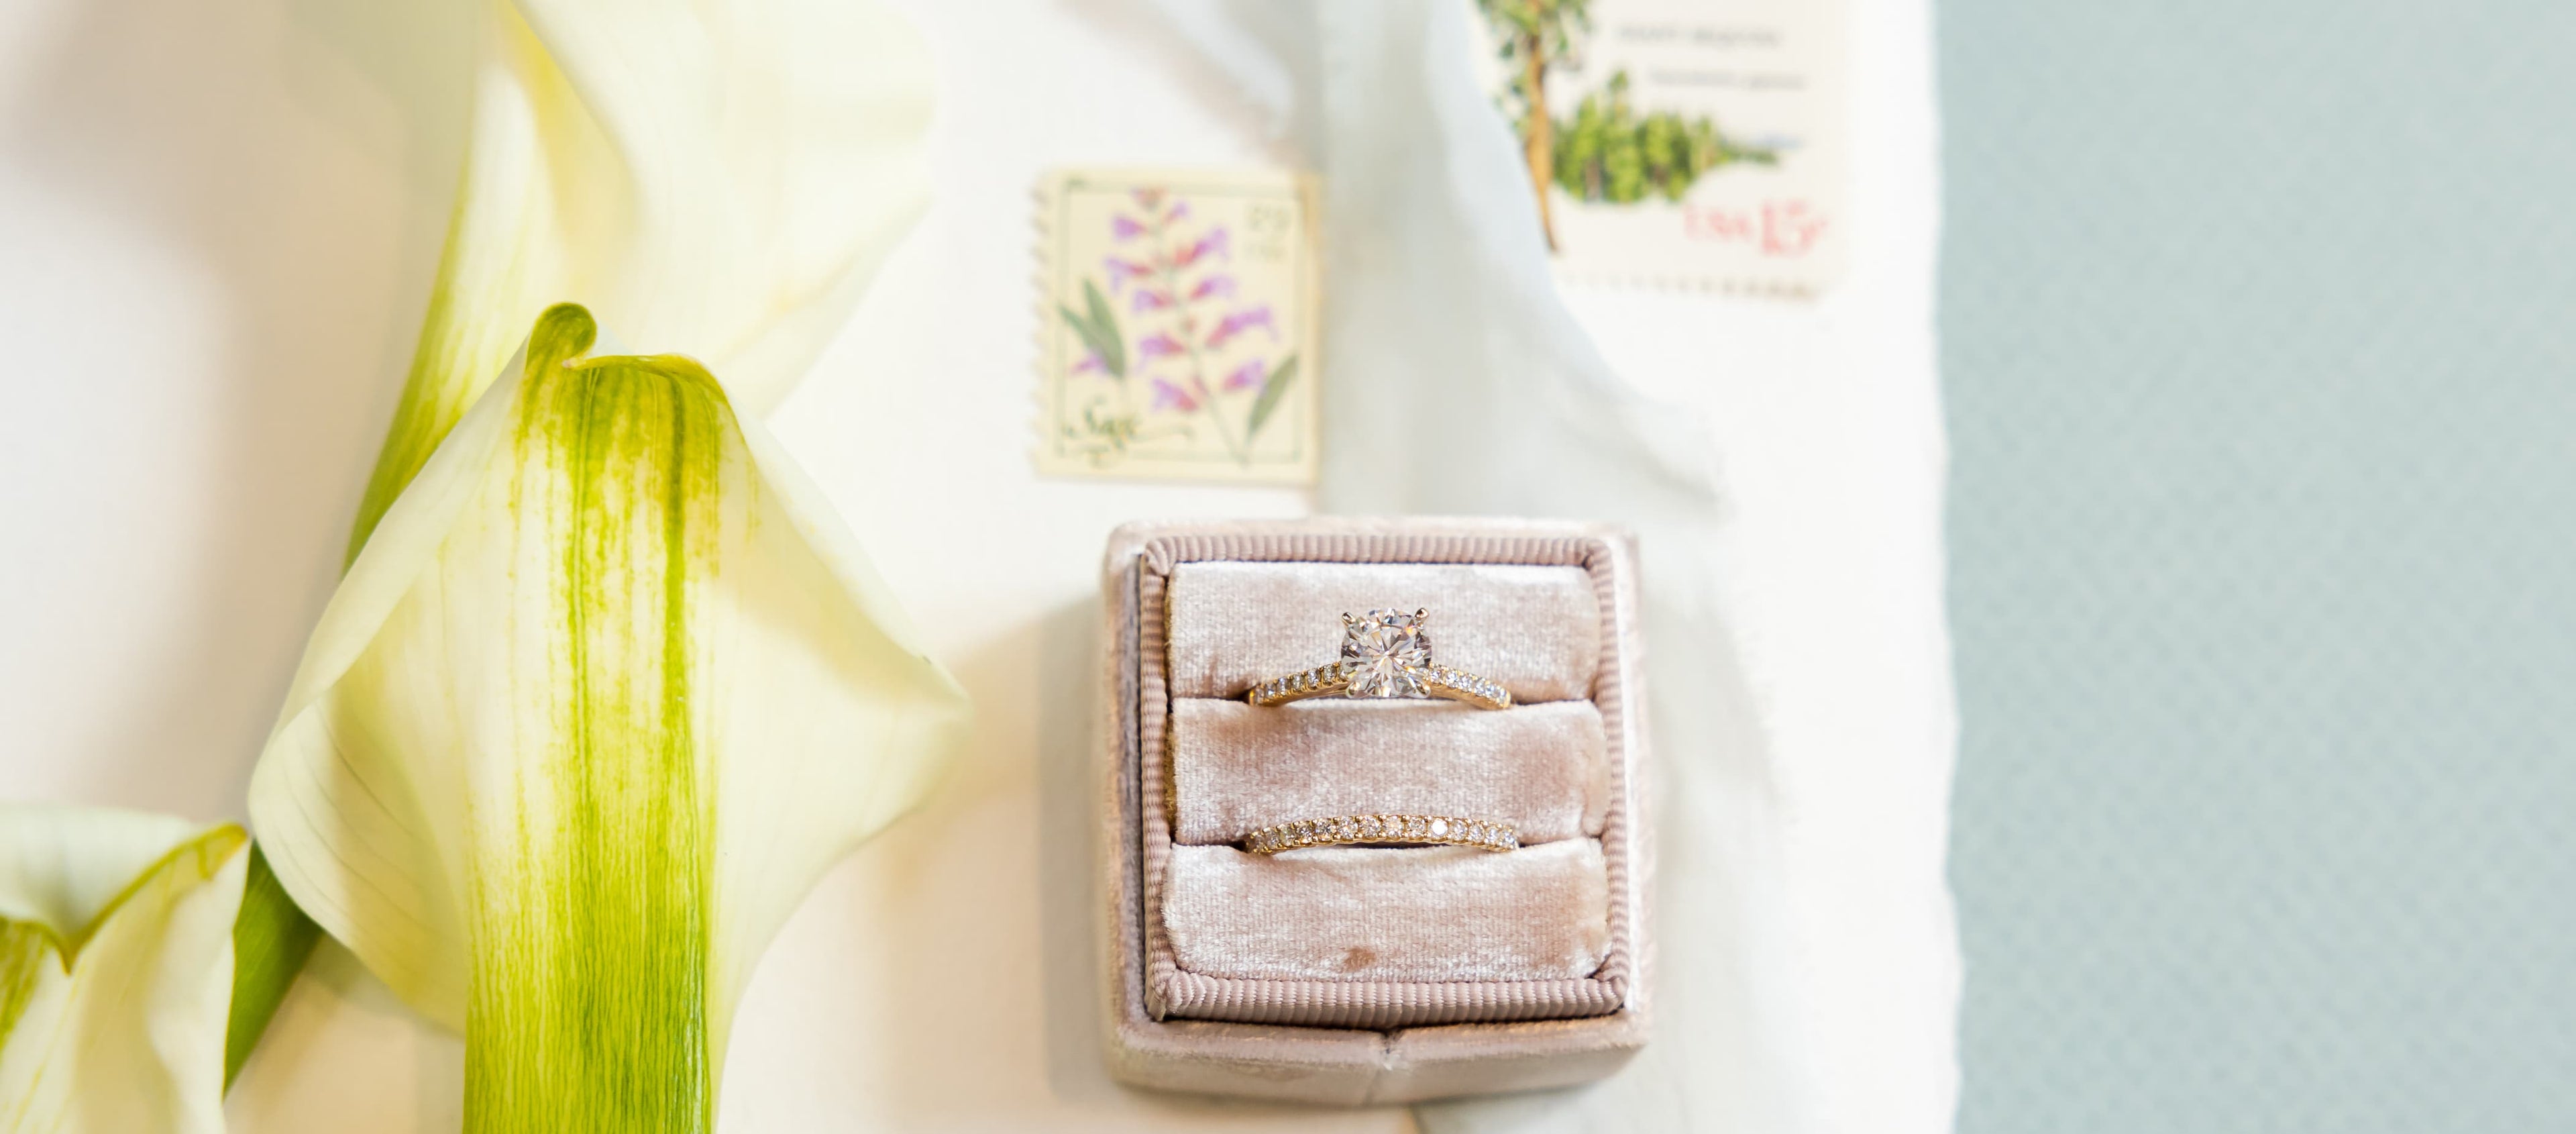 Engagement ring against a calla lily and a pair of stamps